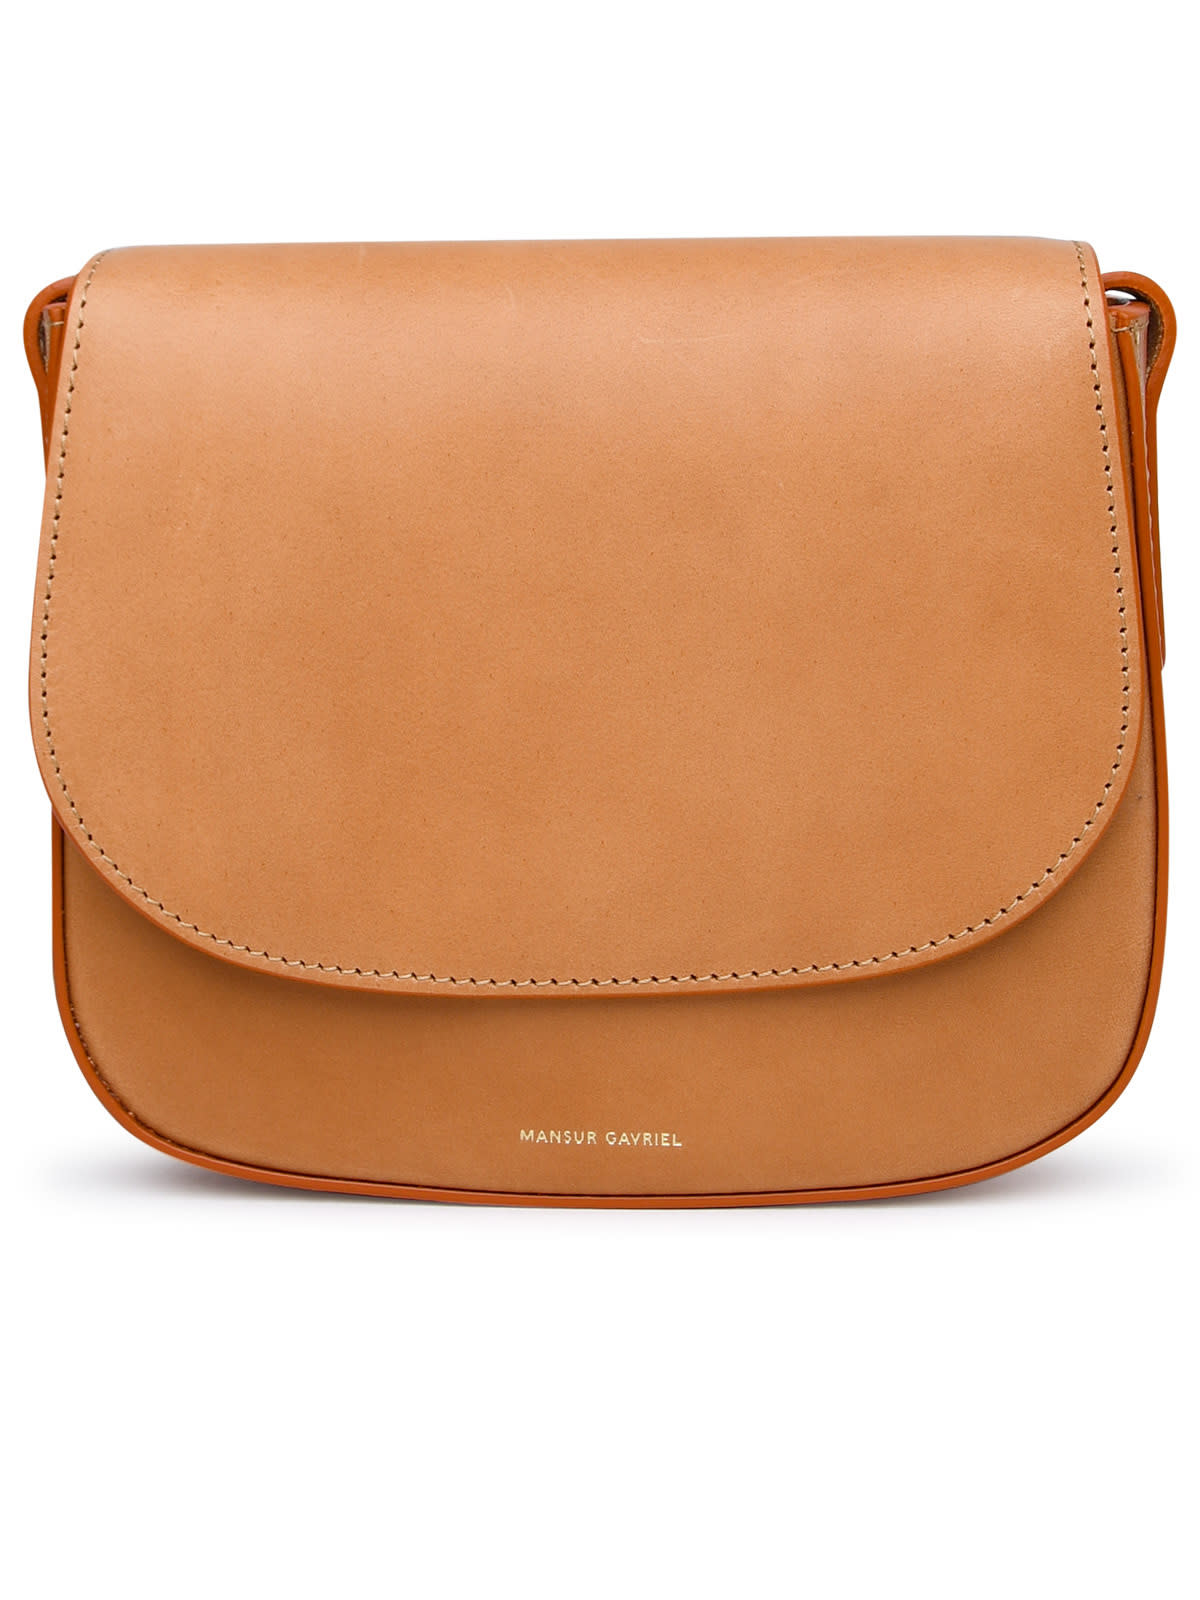 classic Camel Vegetable Tanned Leather Bag